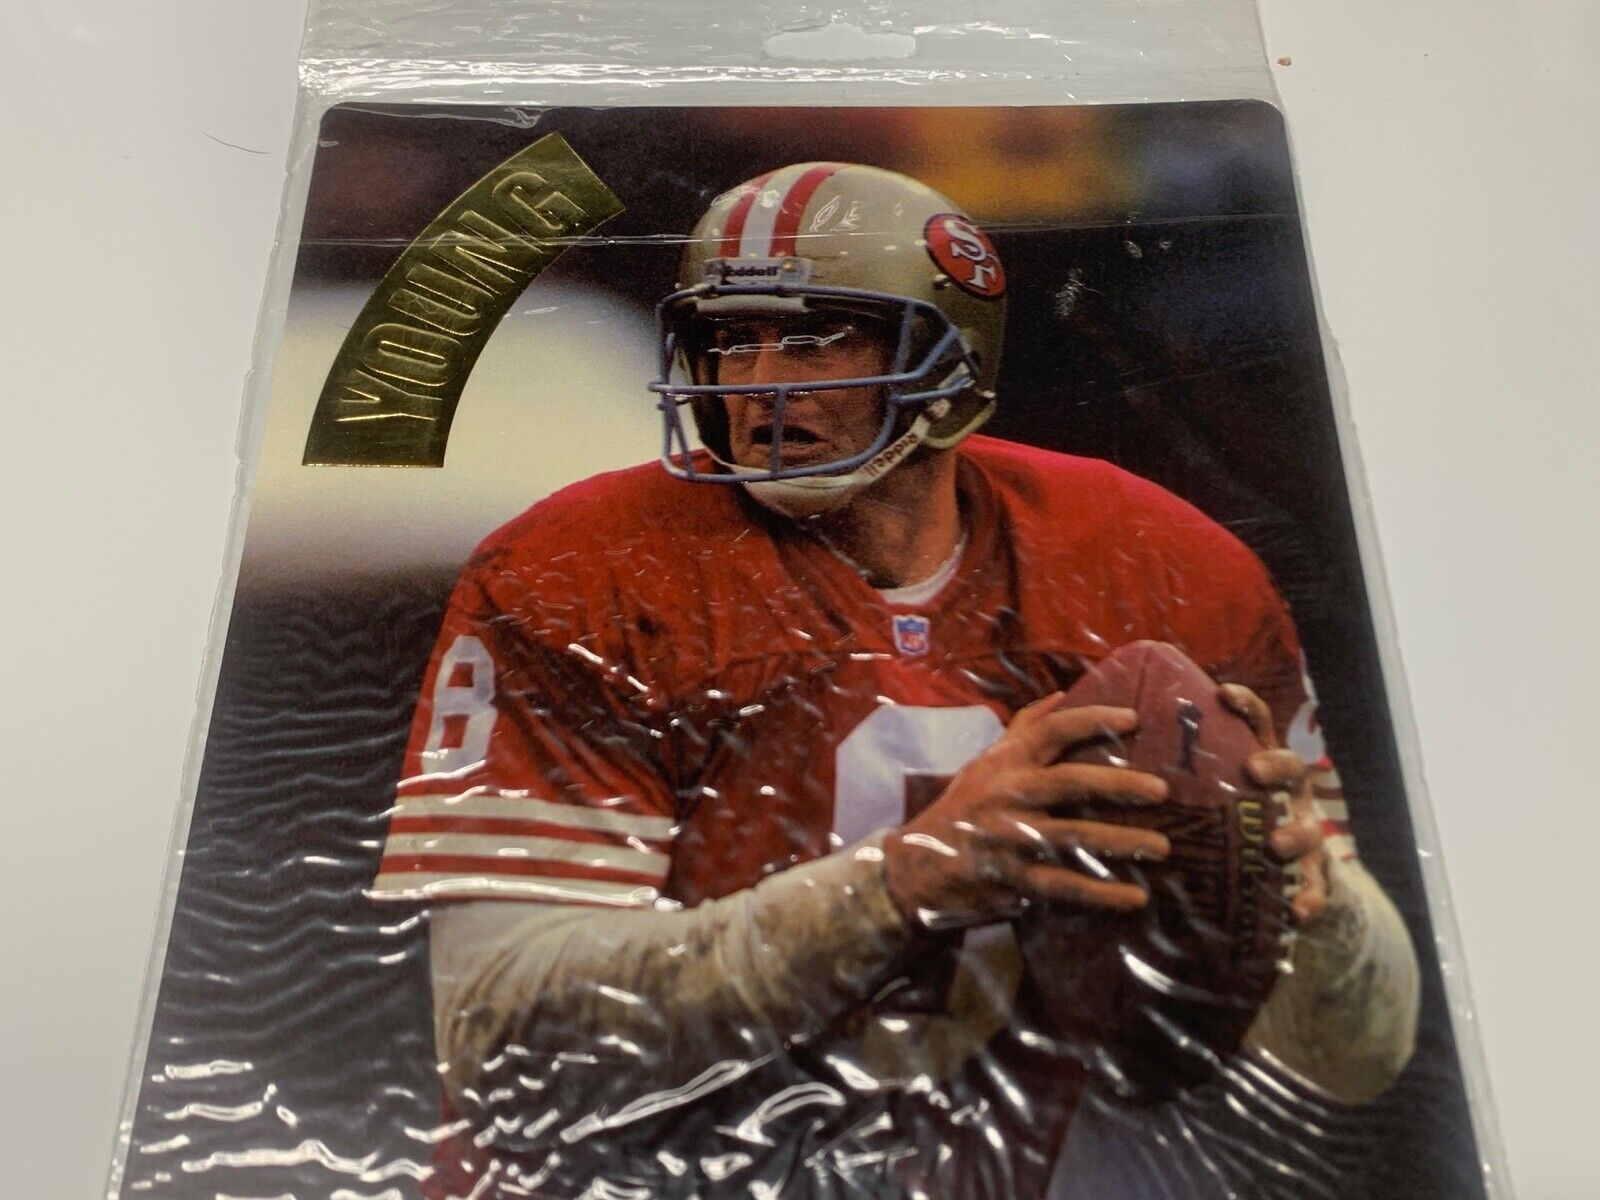 Steve Young 1994 Action Packed Mammoth Prototype USA Printed Card New in Pack